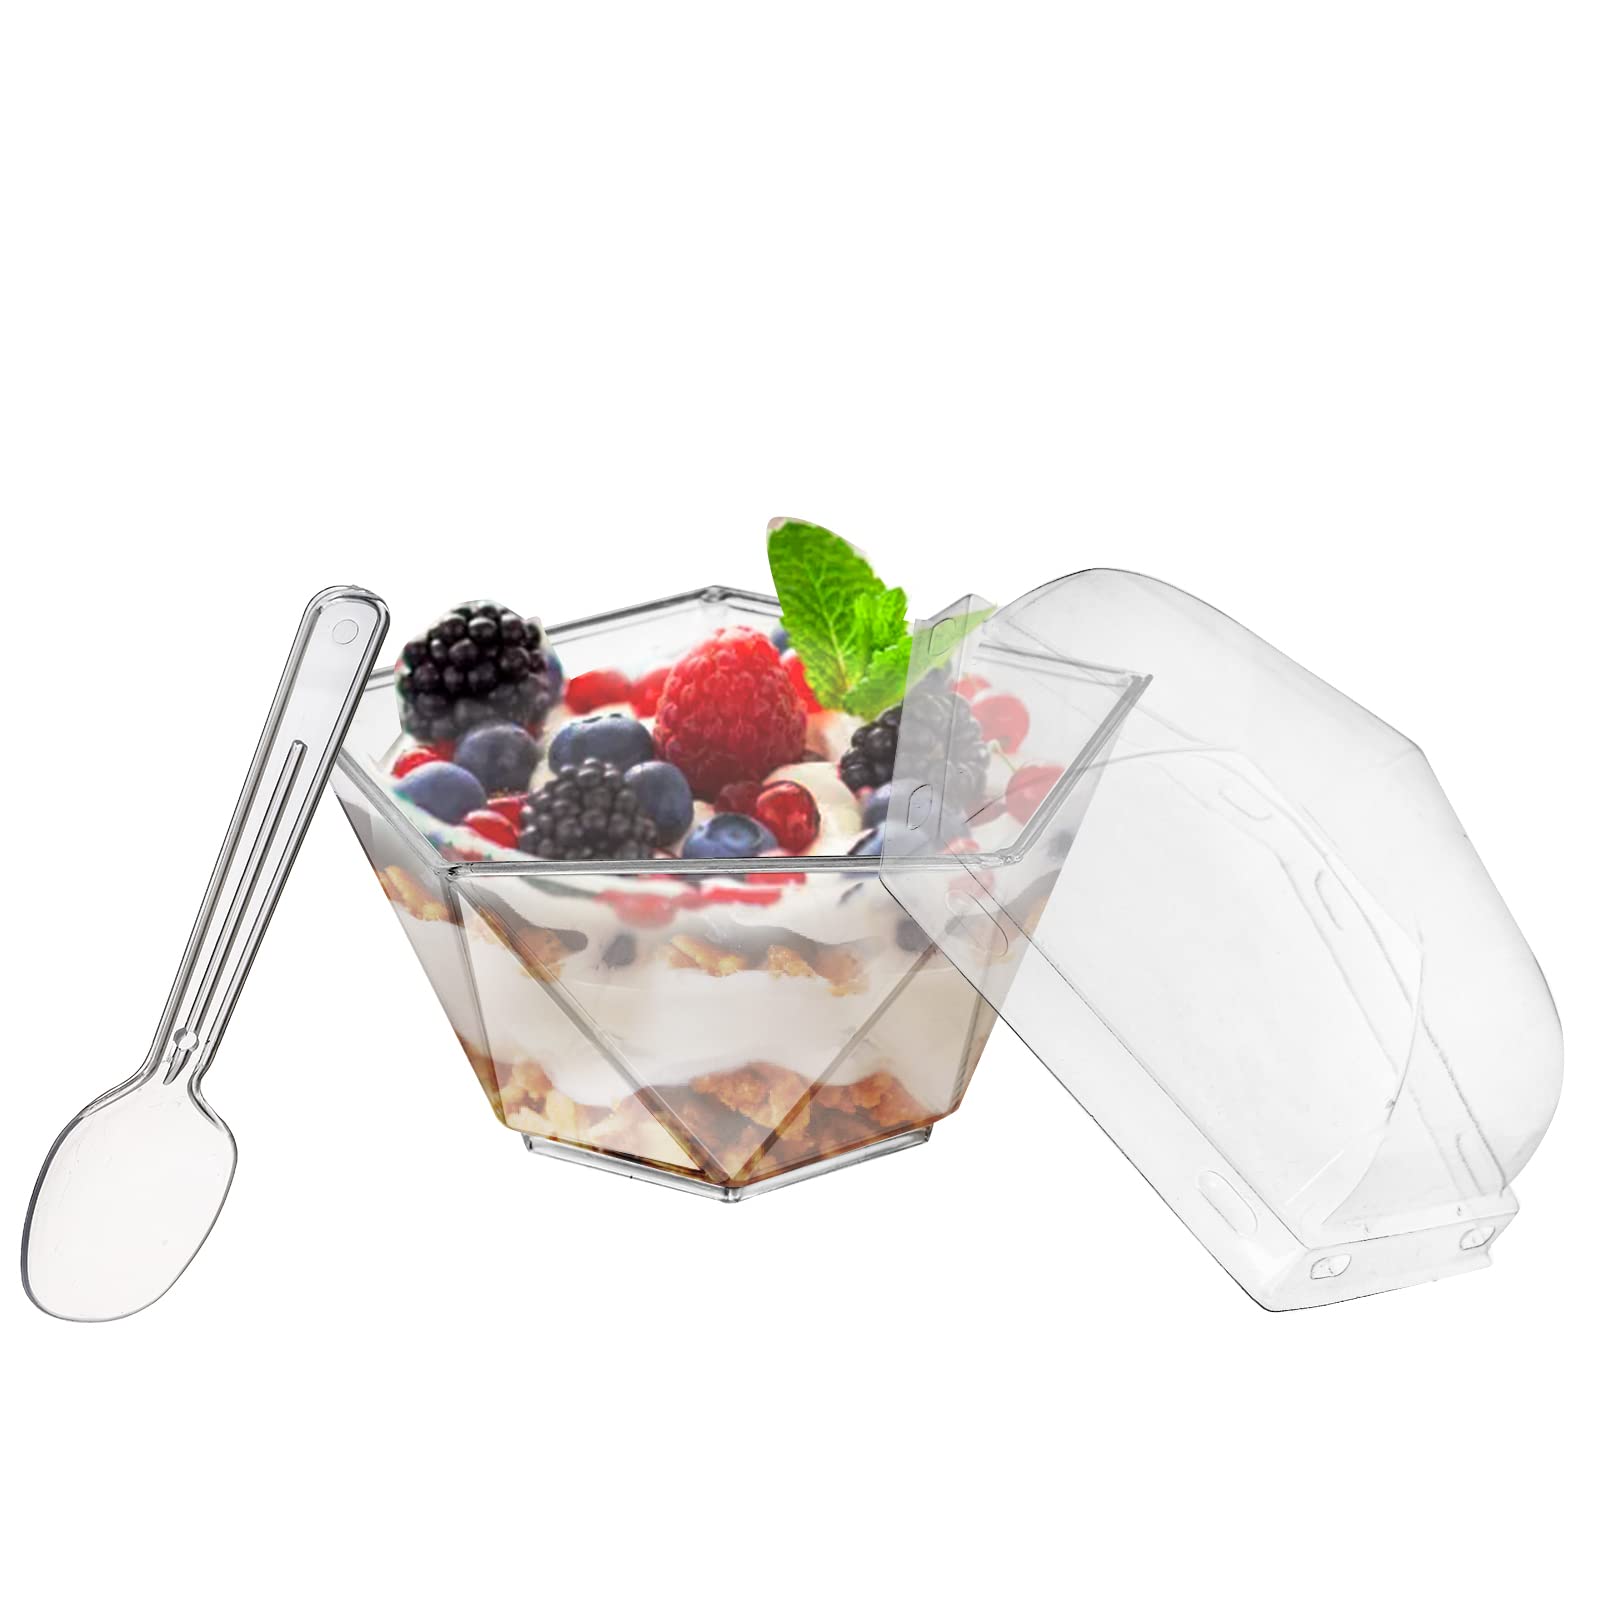 Foraineam 100 Pack Dessert Cups with 100 Lids and 100 Spoons, 3.7 oz. Clear Plastic Parfait Cups Disposable Reusable Diamond-shape Appetizer Cup Serving Bowls for Parties, Weddings and More